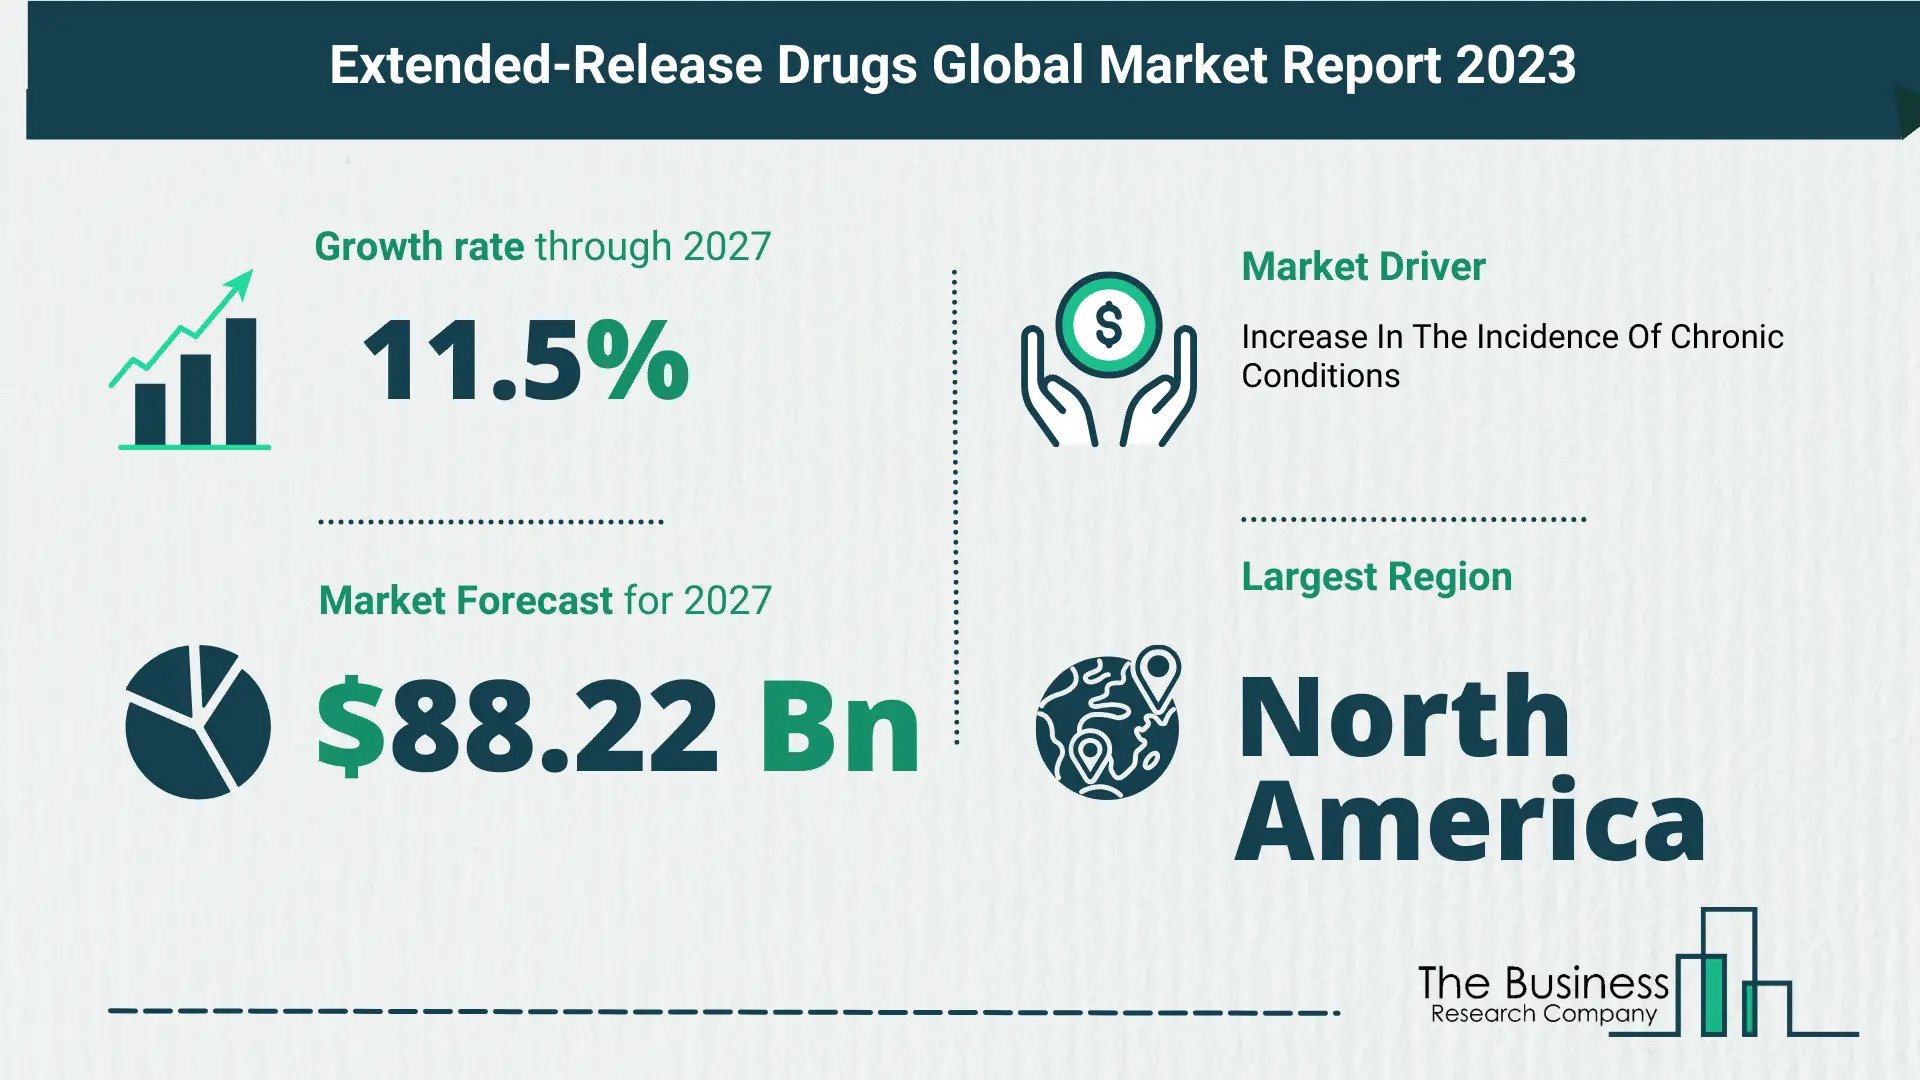 Overview Of The Extended-Release Drugs Market 2023: Size, Drivers, And Trends